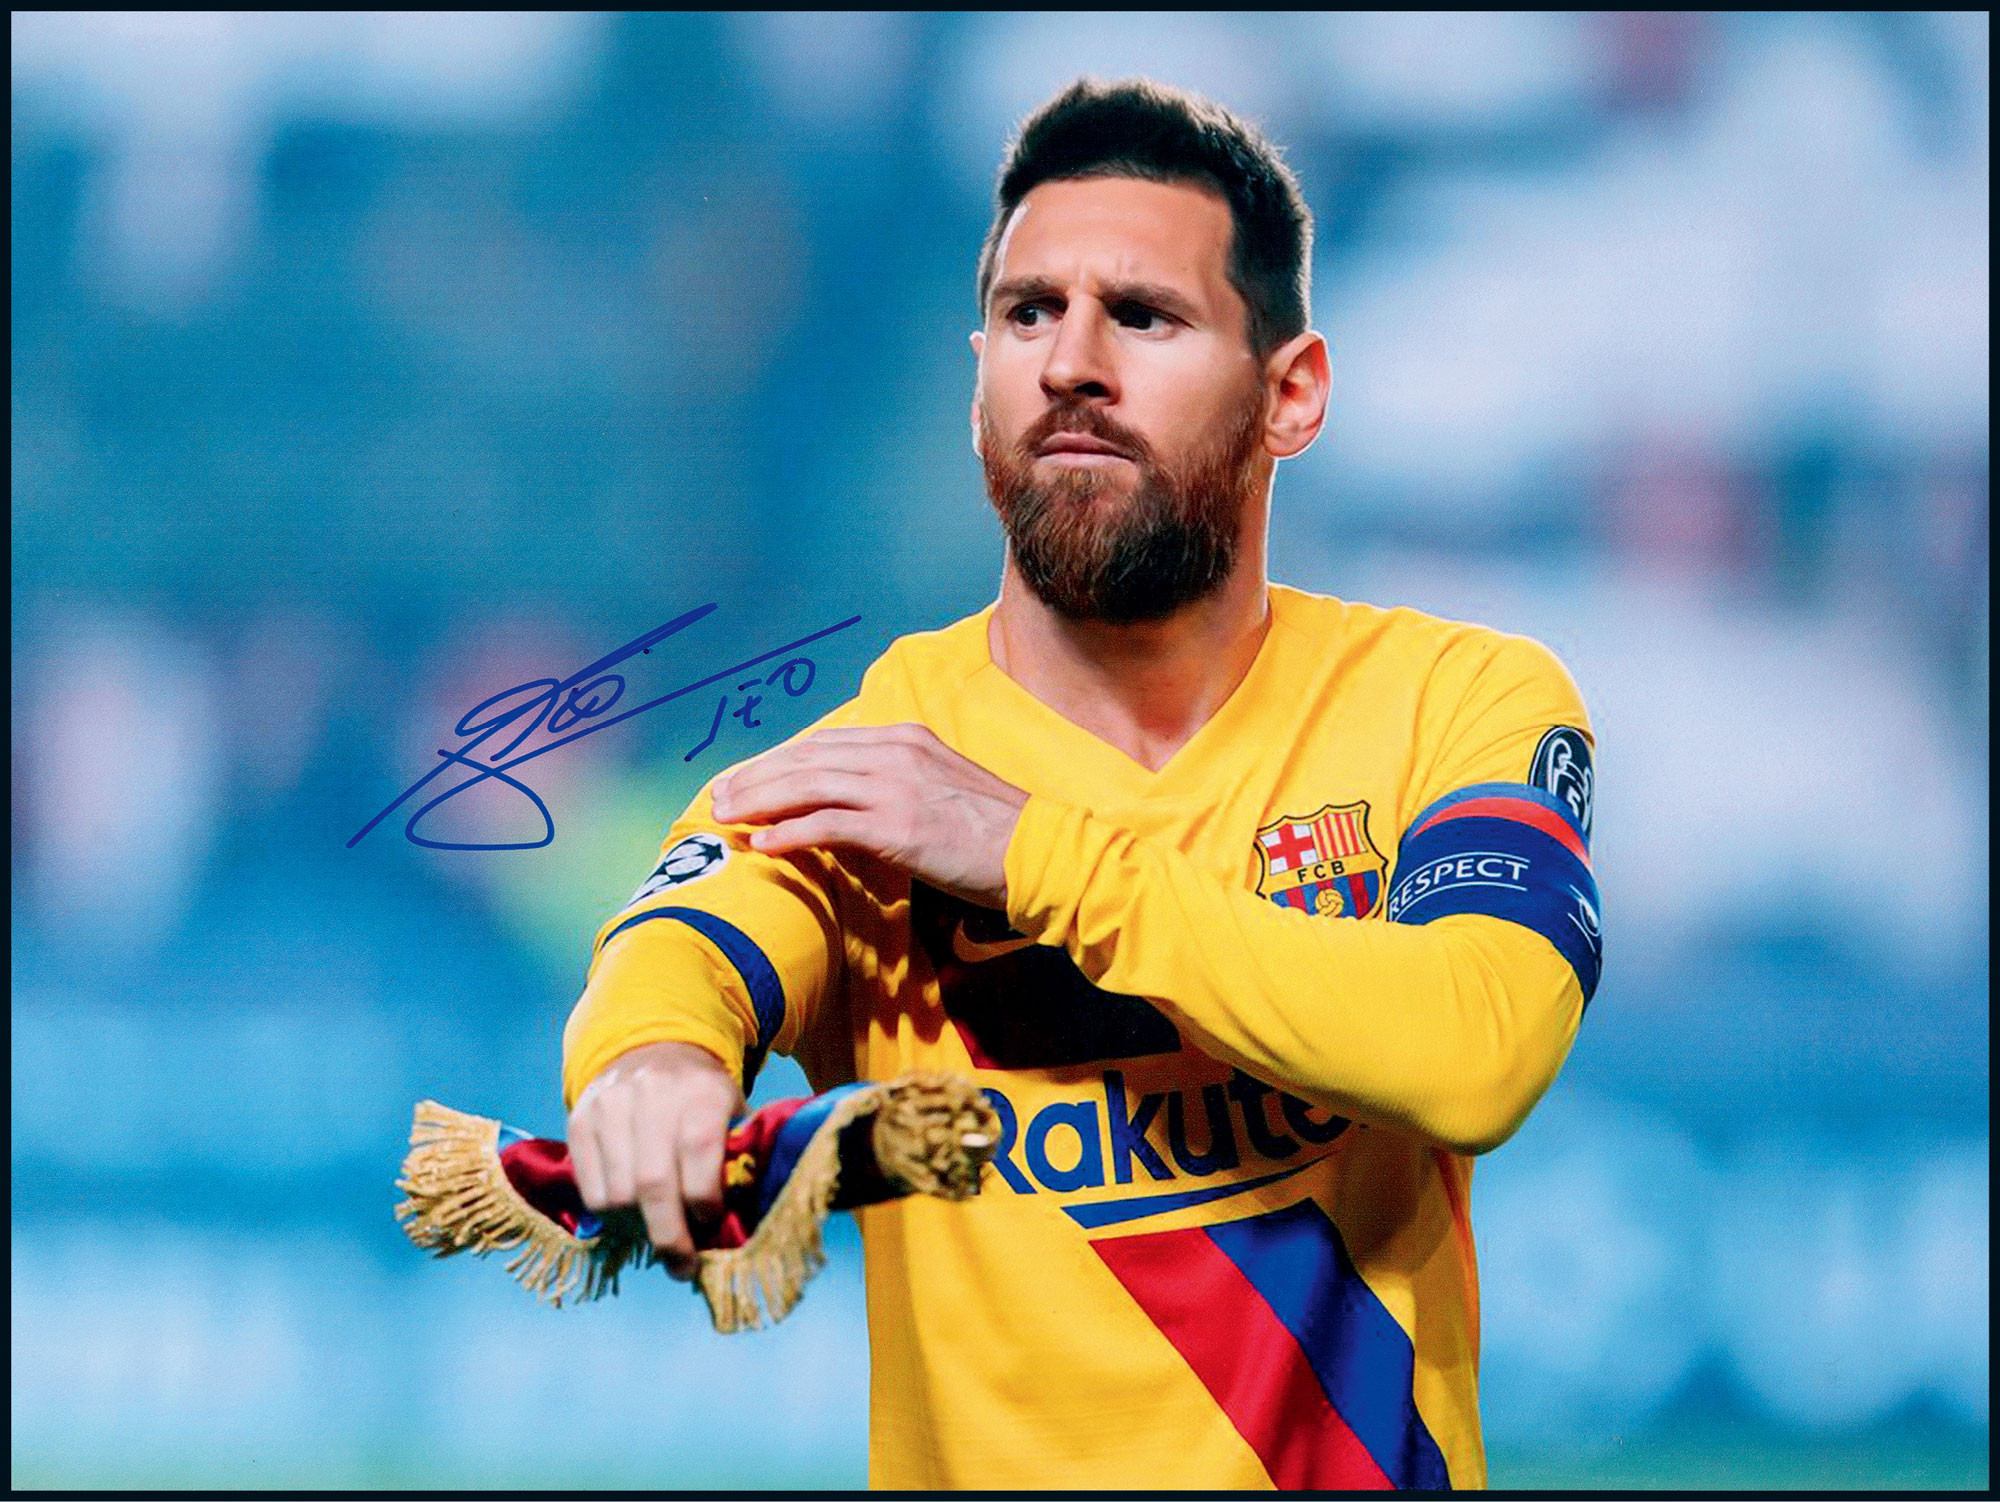 The autographed photo of Lionel Messi, the “FIFA world player”, with certificate